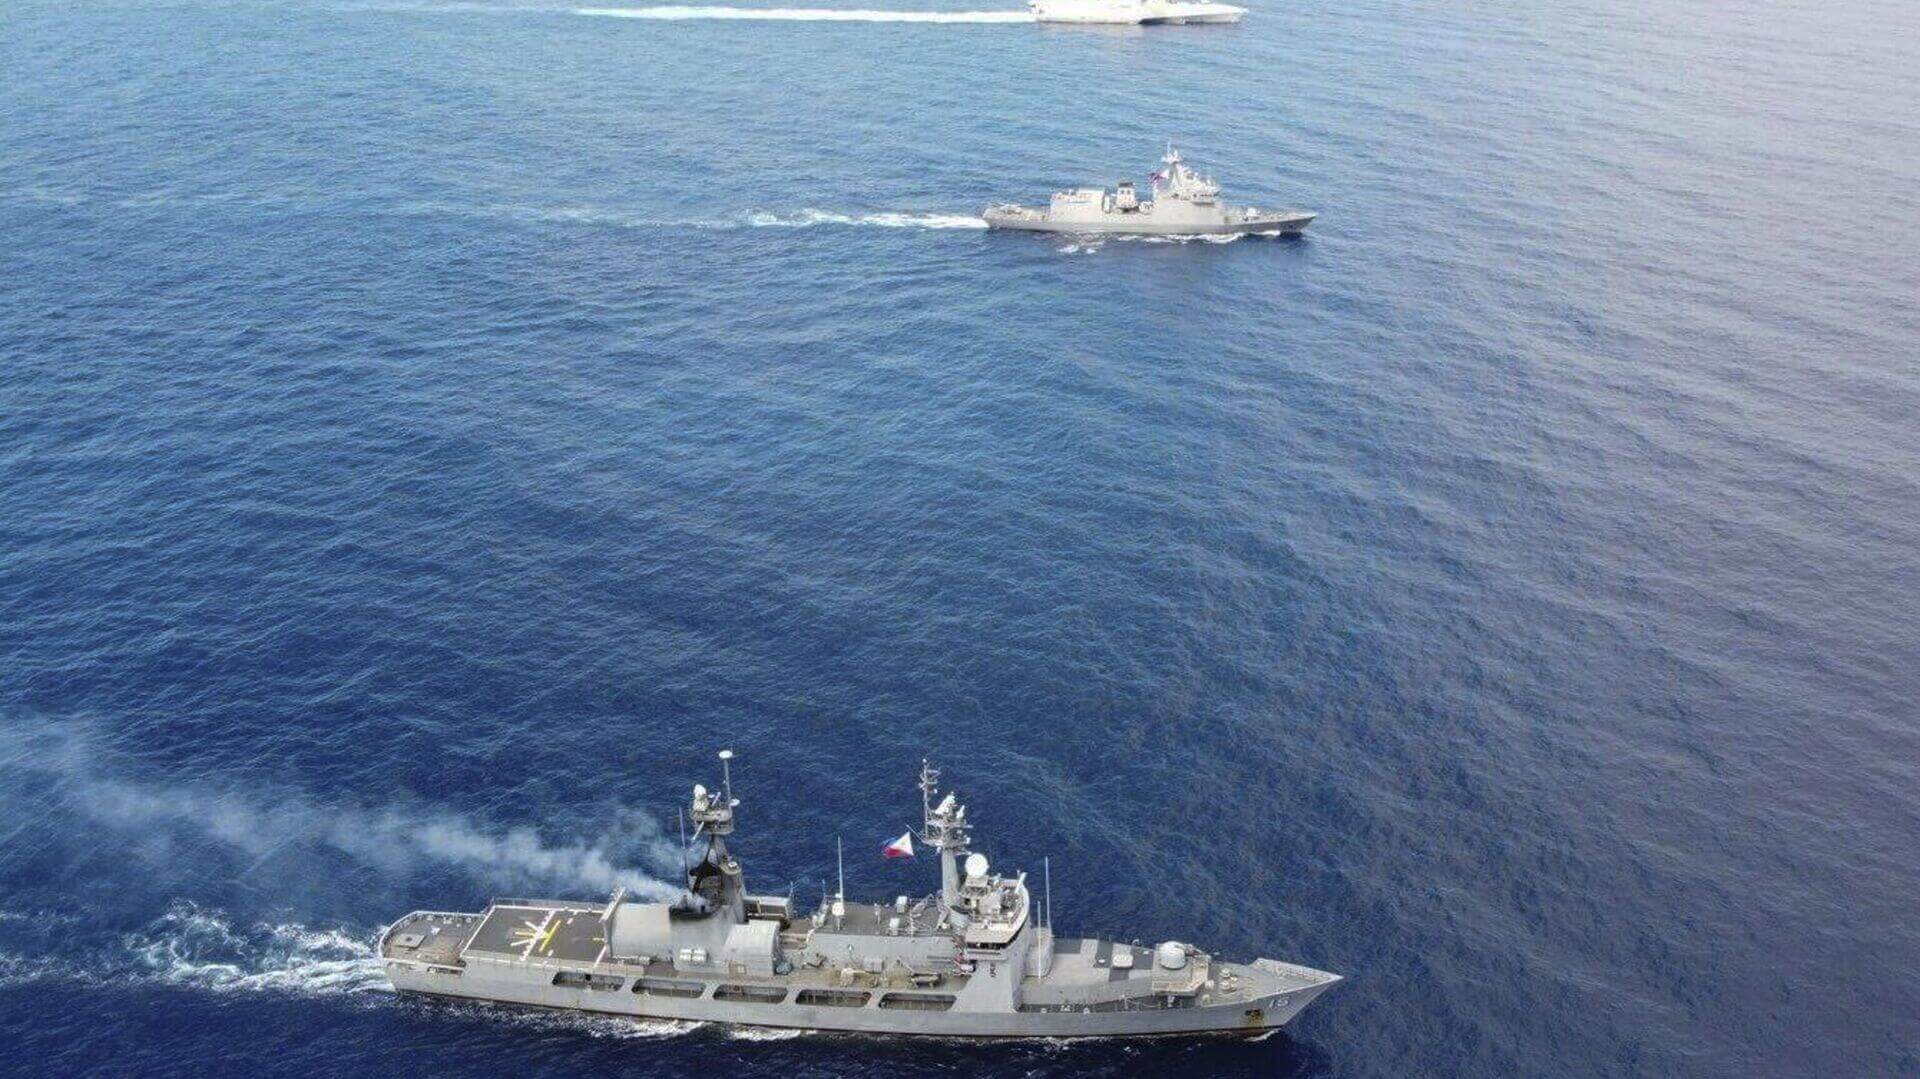 Chinese Military Conducts Patrols in South China Sea as US, Allies Hold Military Drills in Disputed Region